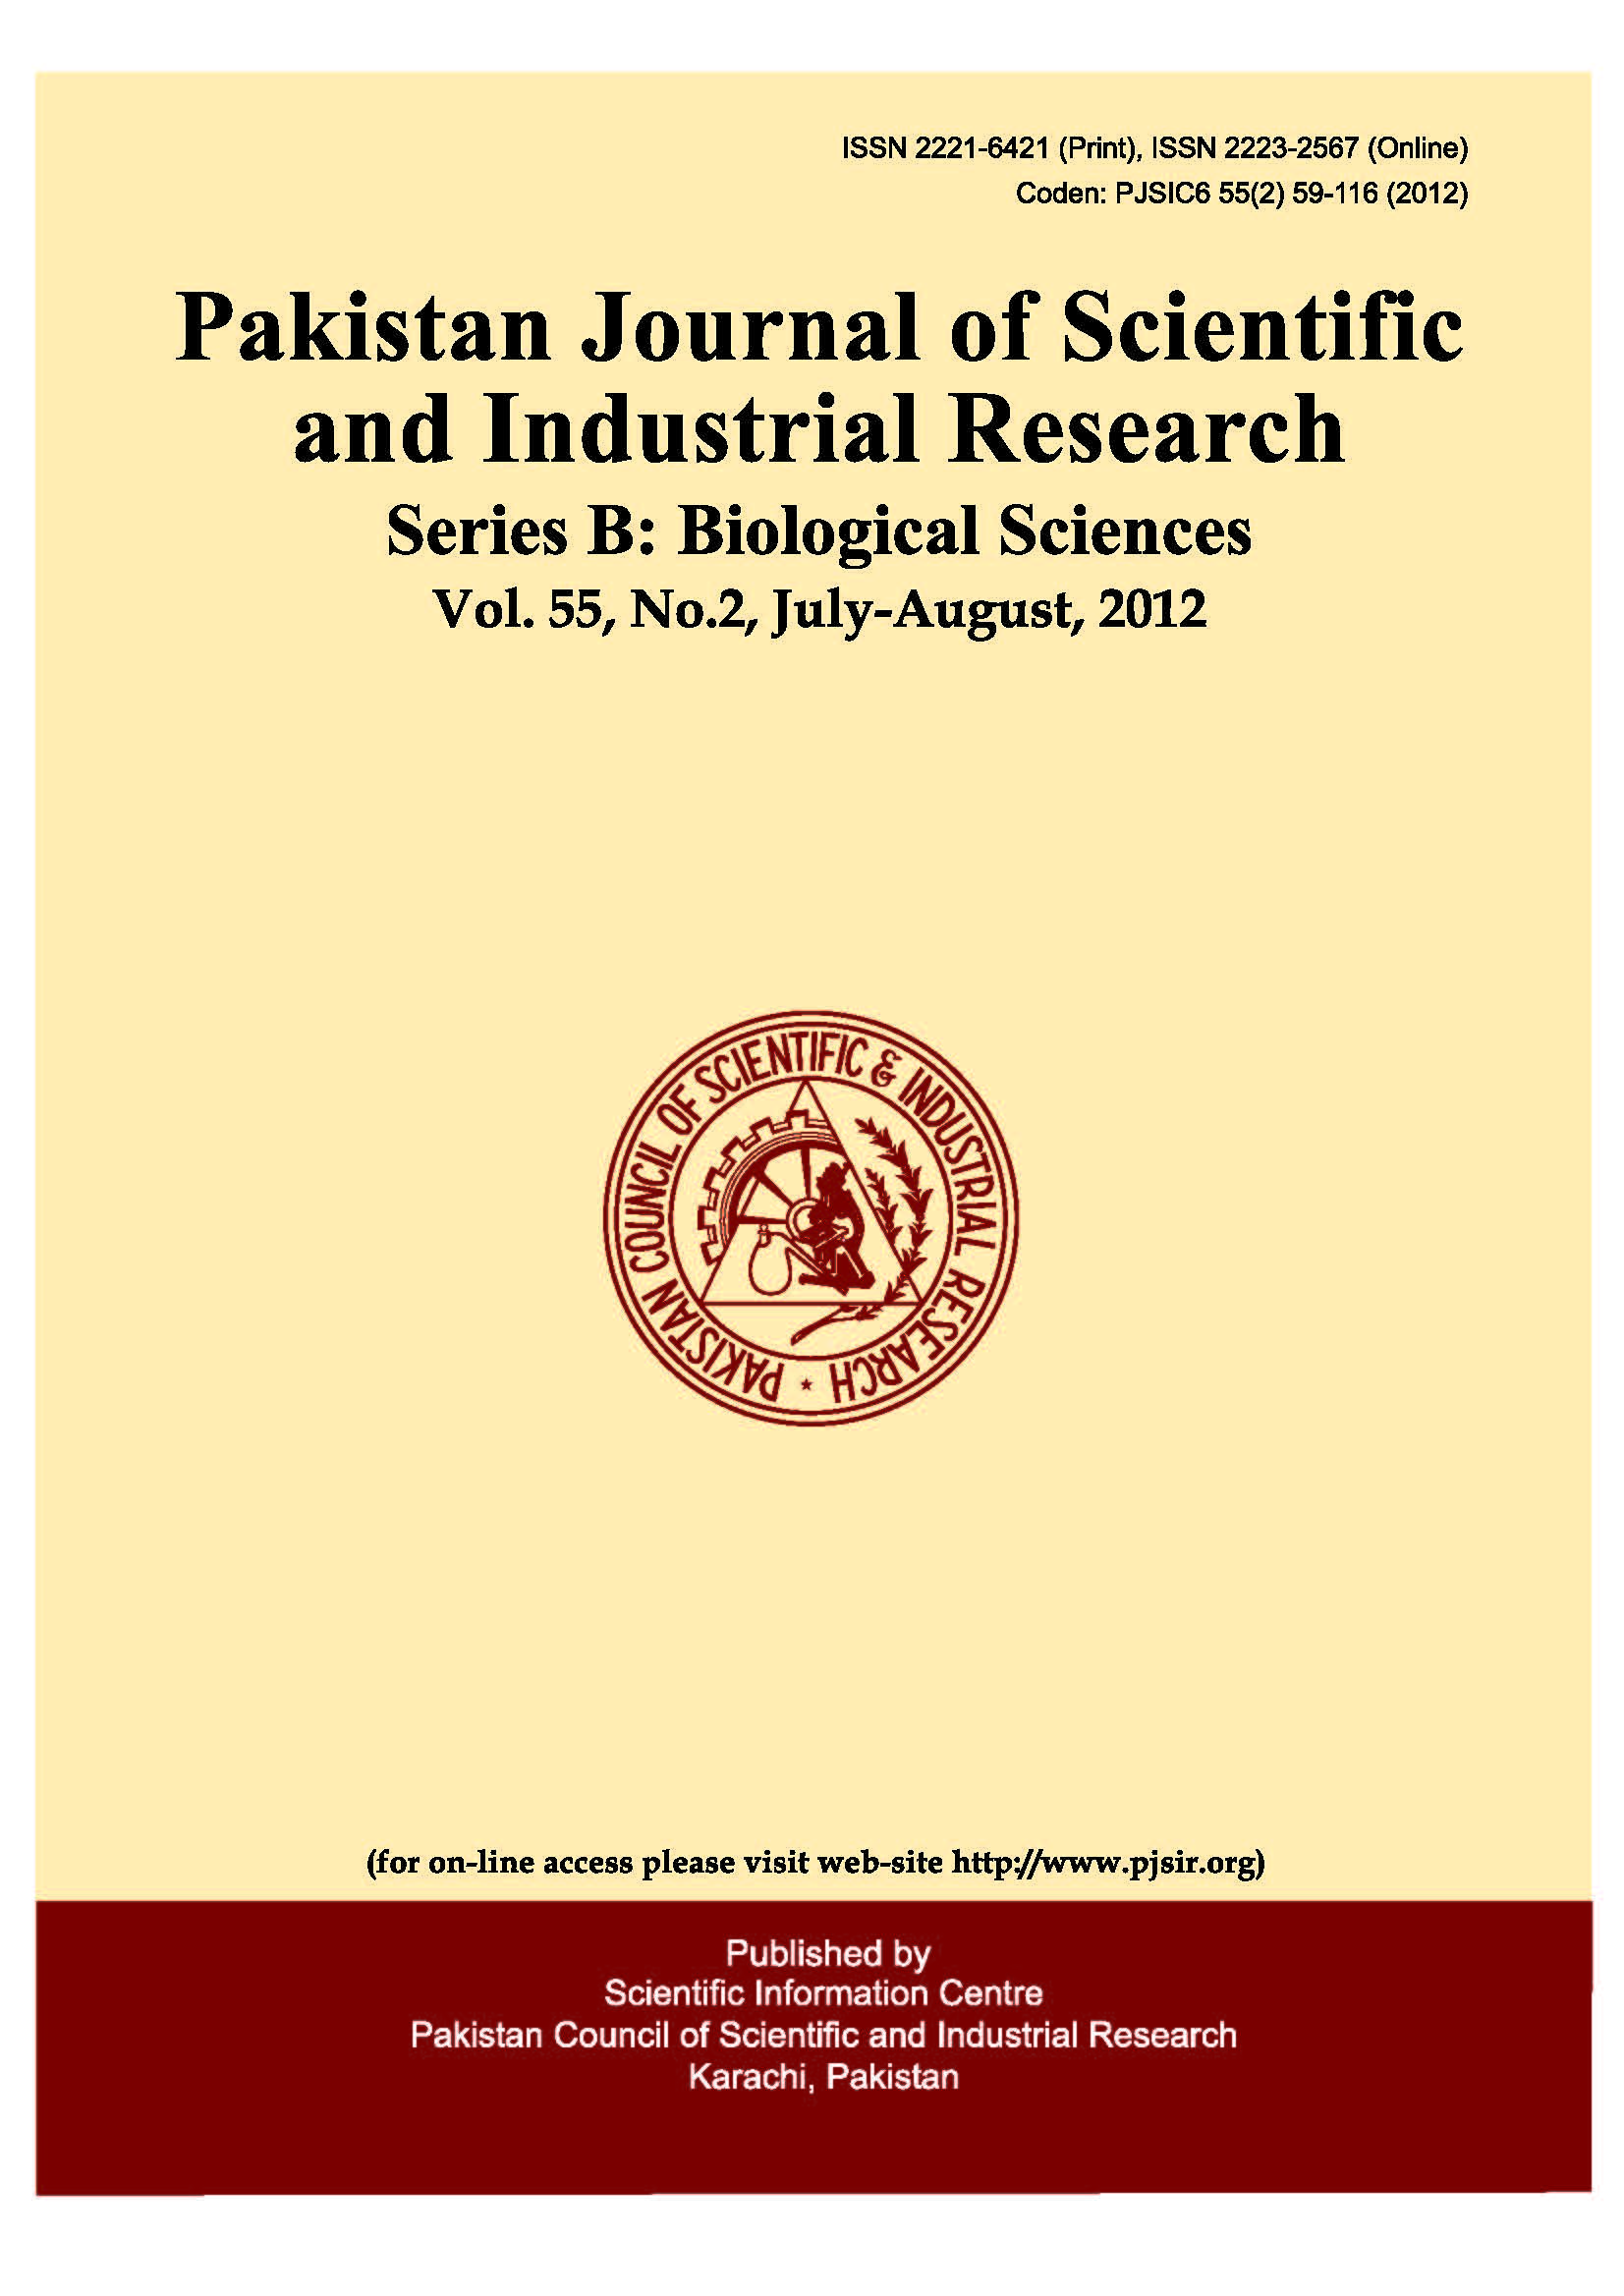 					View Vol. 55 No. 2 (2012): Pakistan Journal of Scientific and Industrial Research  Series B: Biological Sciences
				